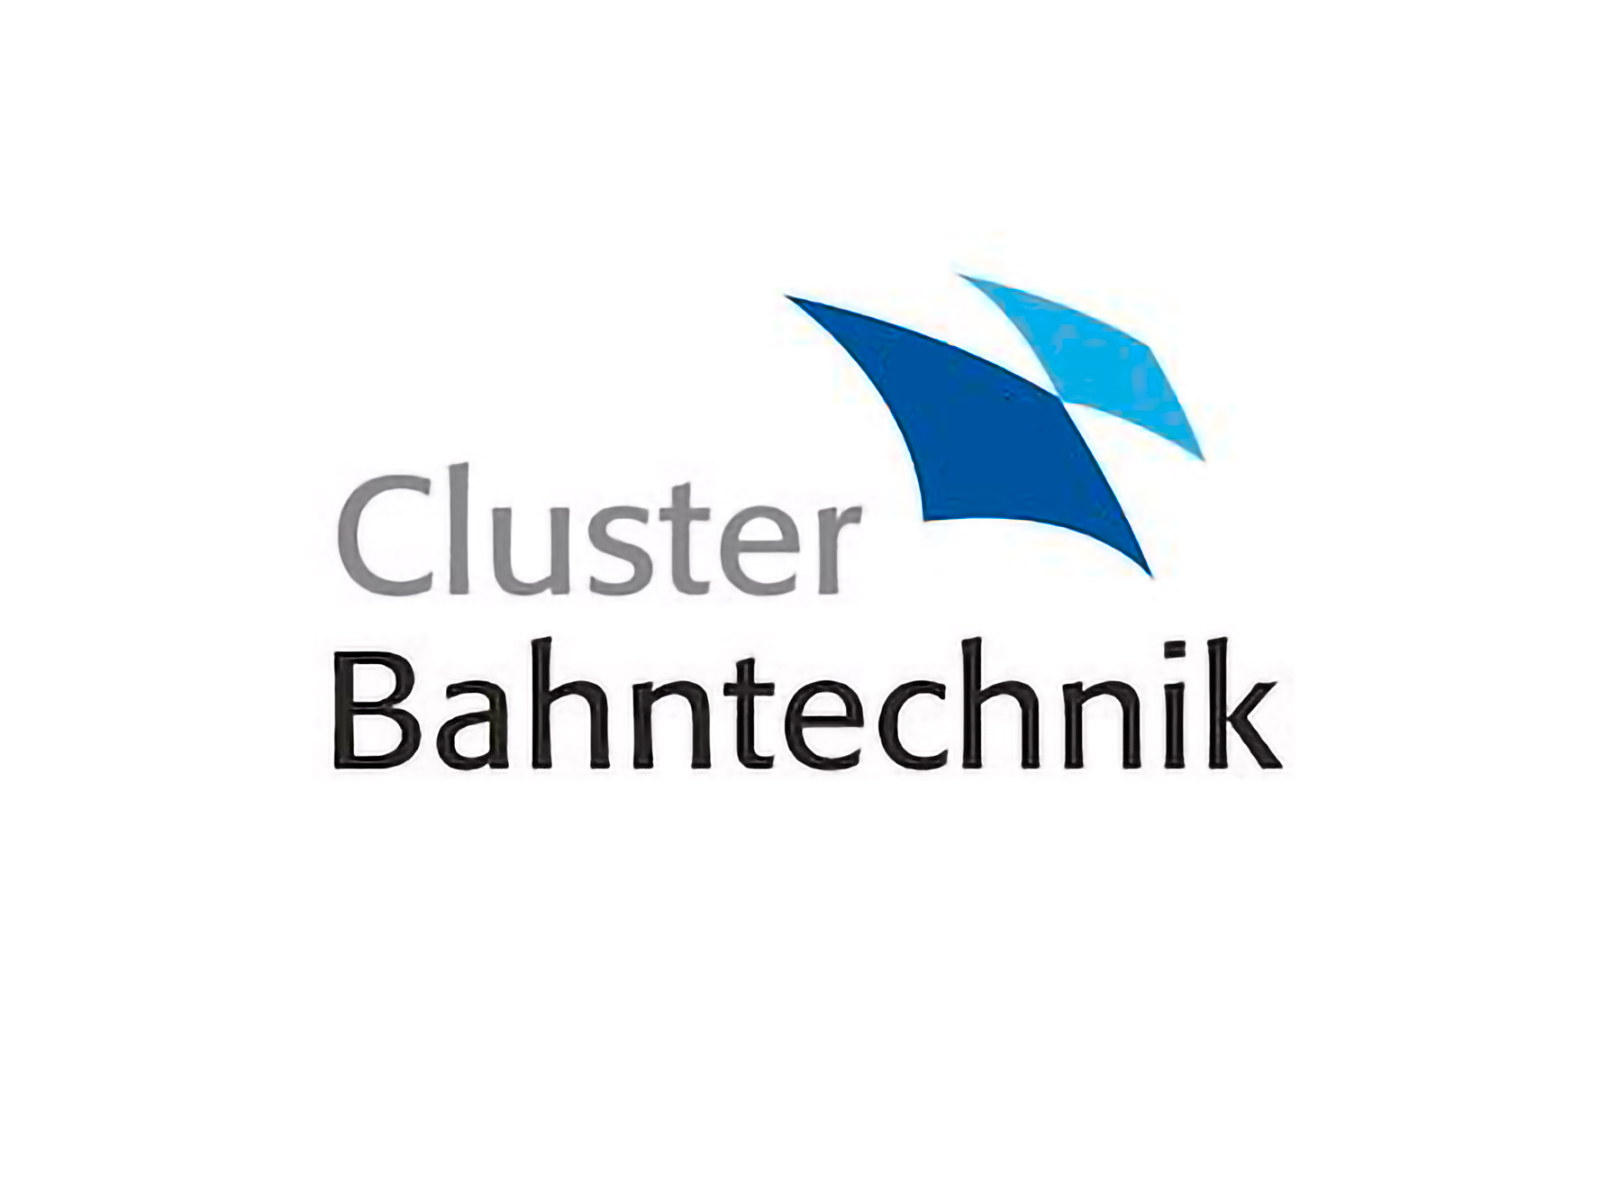 The image shows the Cluster Bahntechnik logo